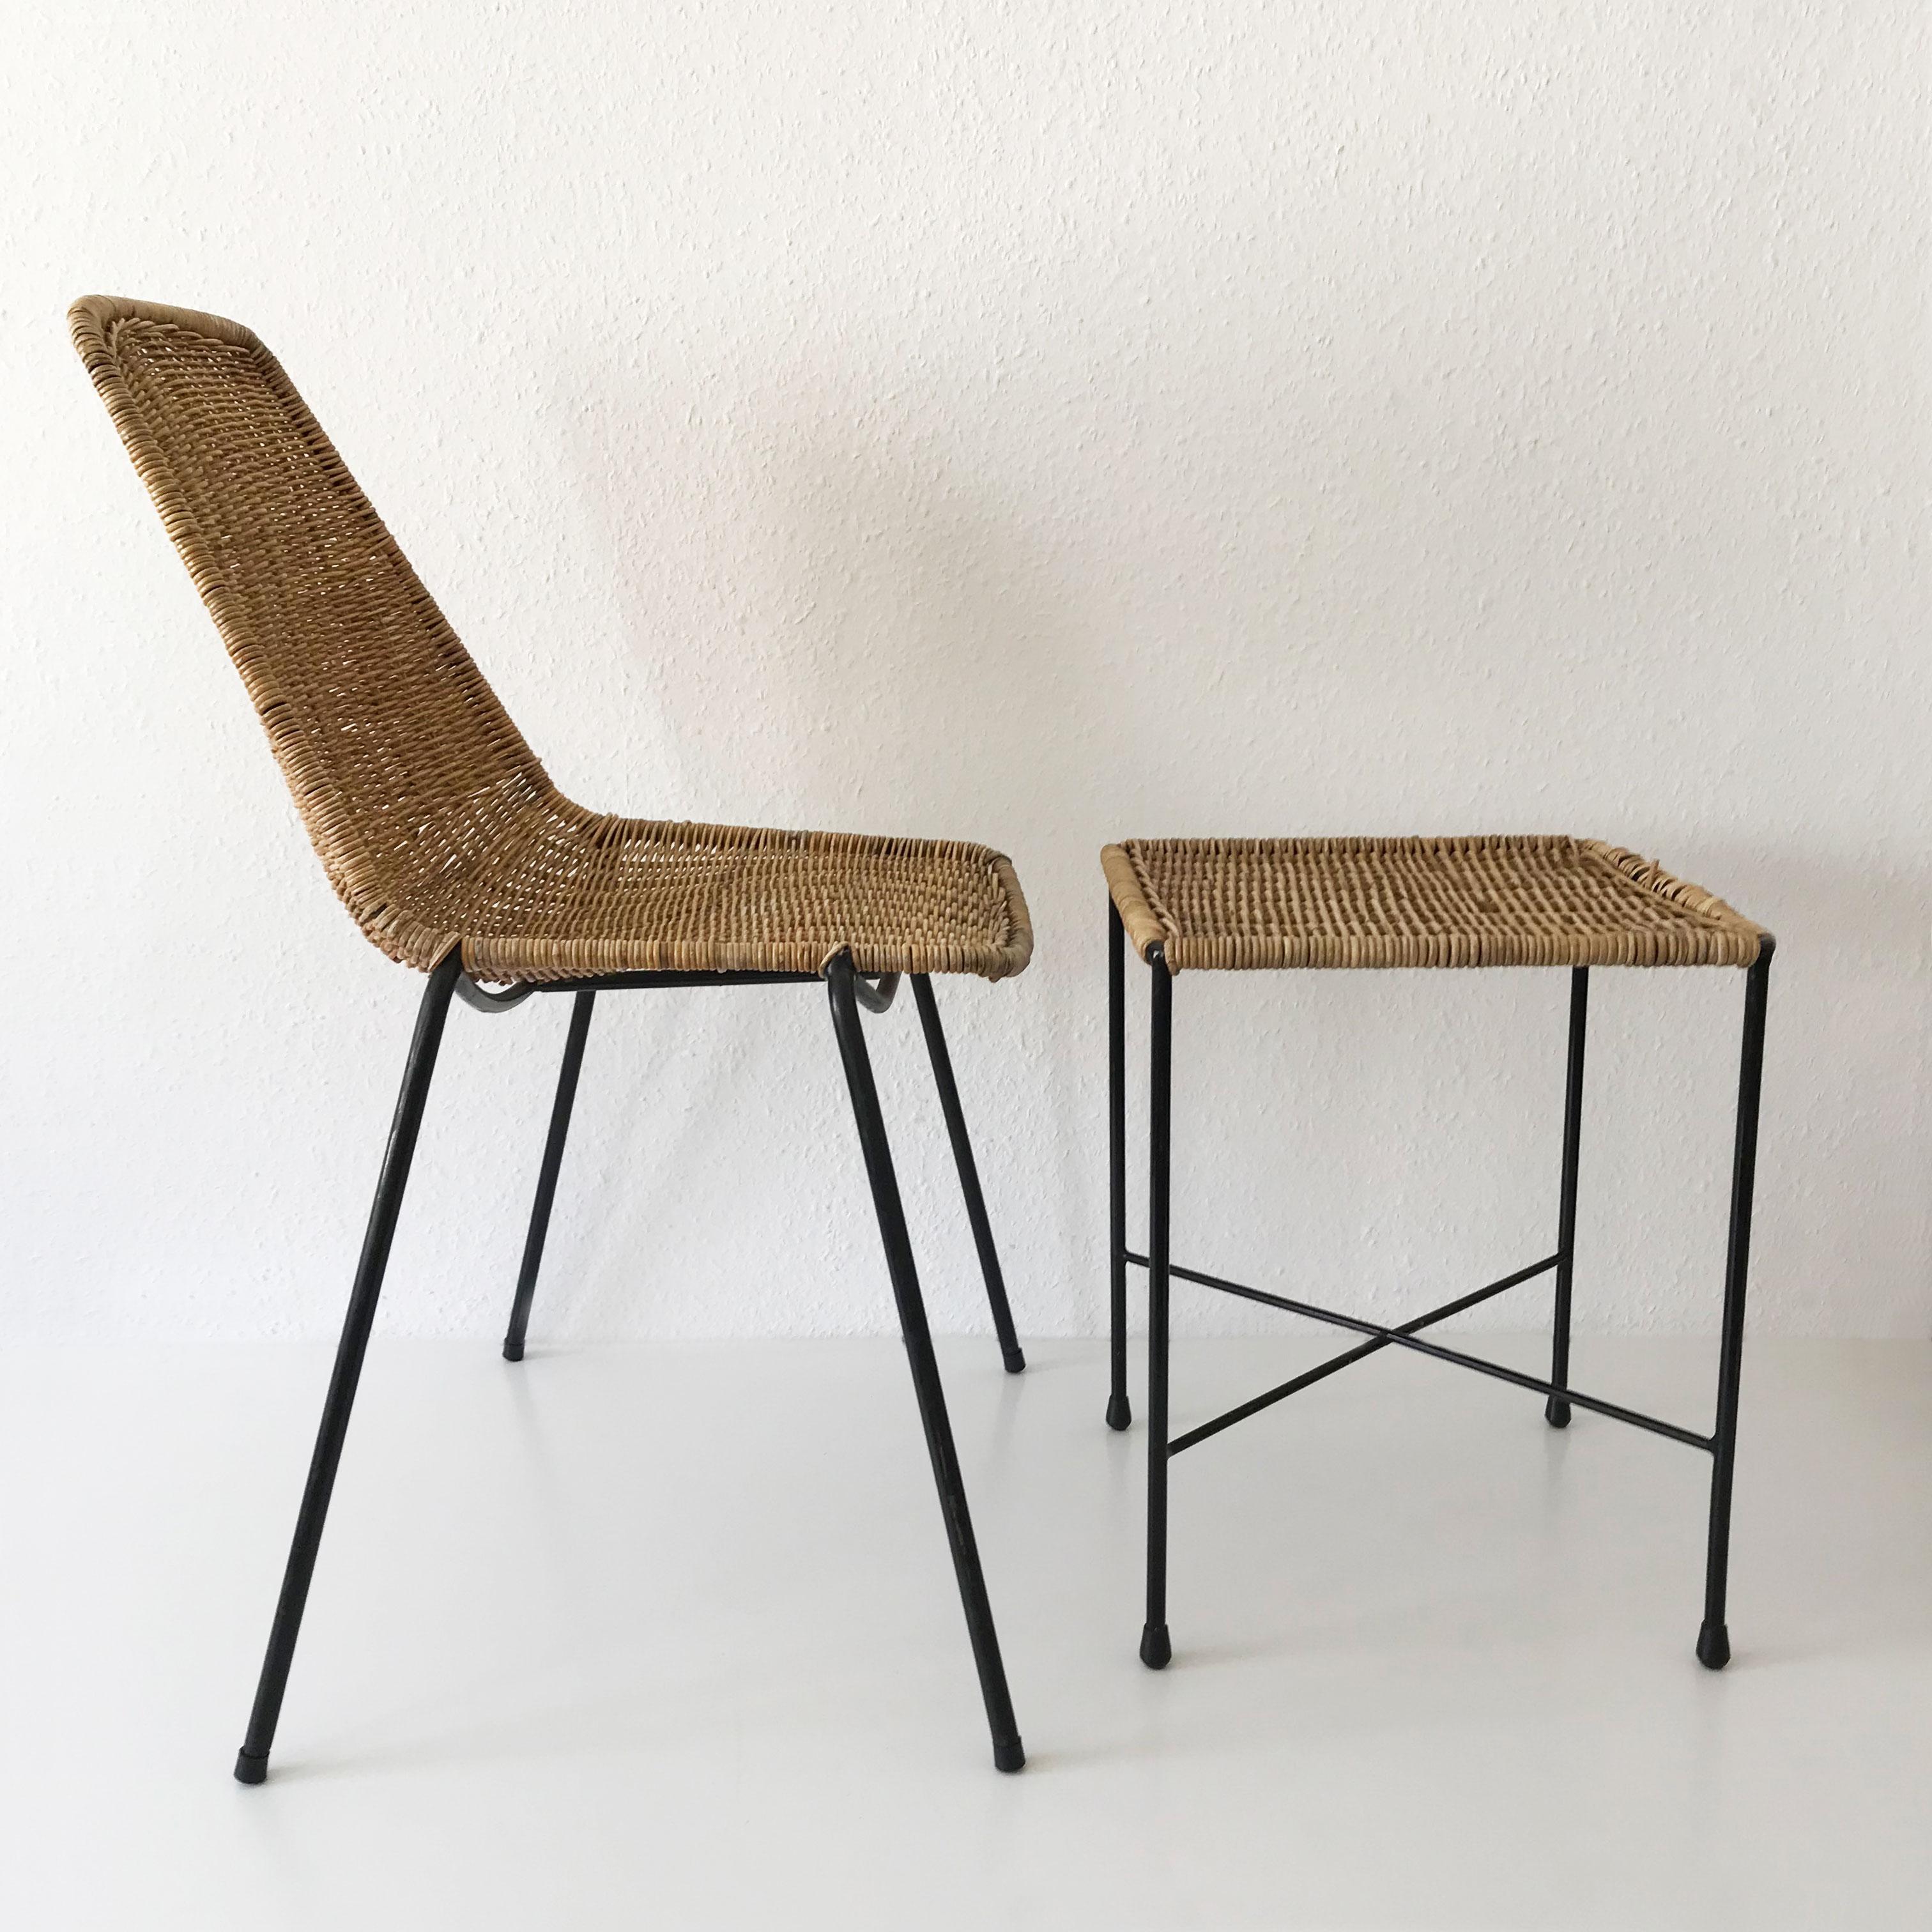 Set of Two Basket Chairs and Stool by Gian Franco Legler, 1951, Switzerland 4